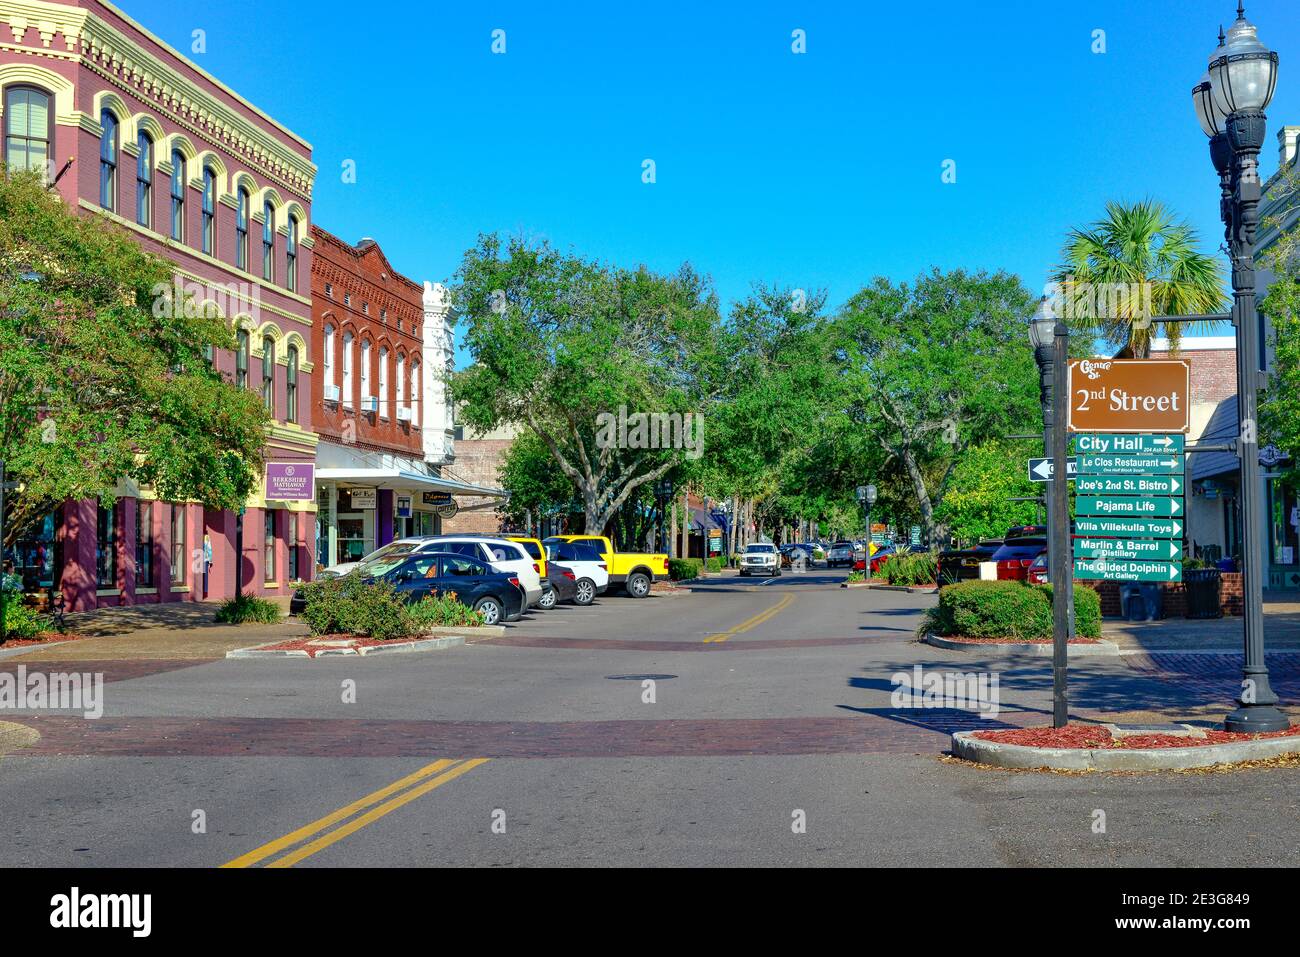 Historic architecture on Centre Street at 2nd Street,  with directional signs for downtown galleries,  shops and City Hall, in historic Fernandina Bea Stock Photo